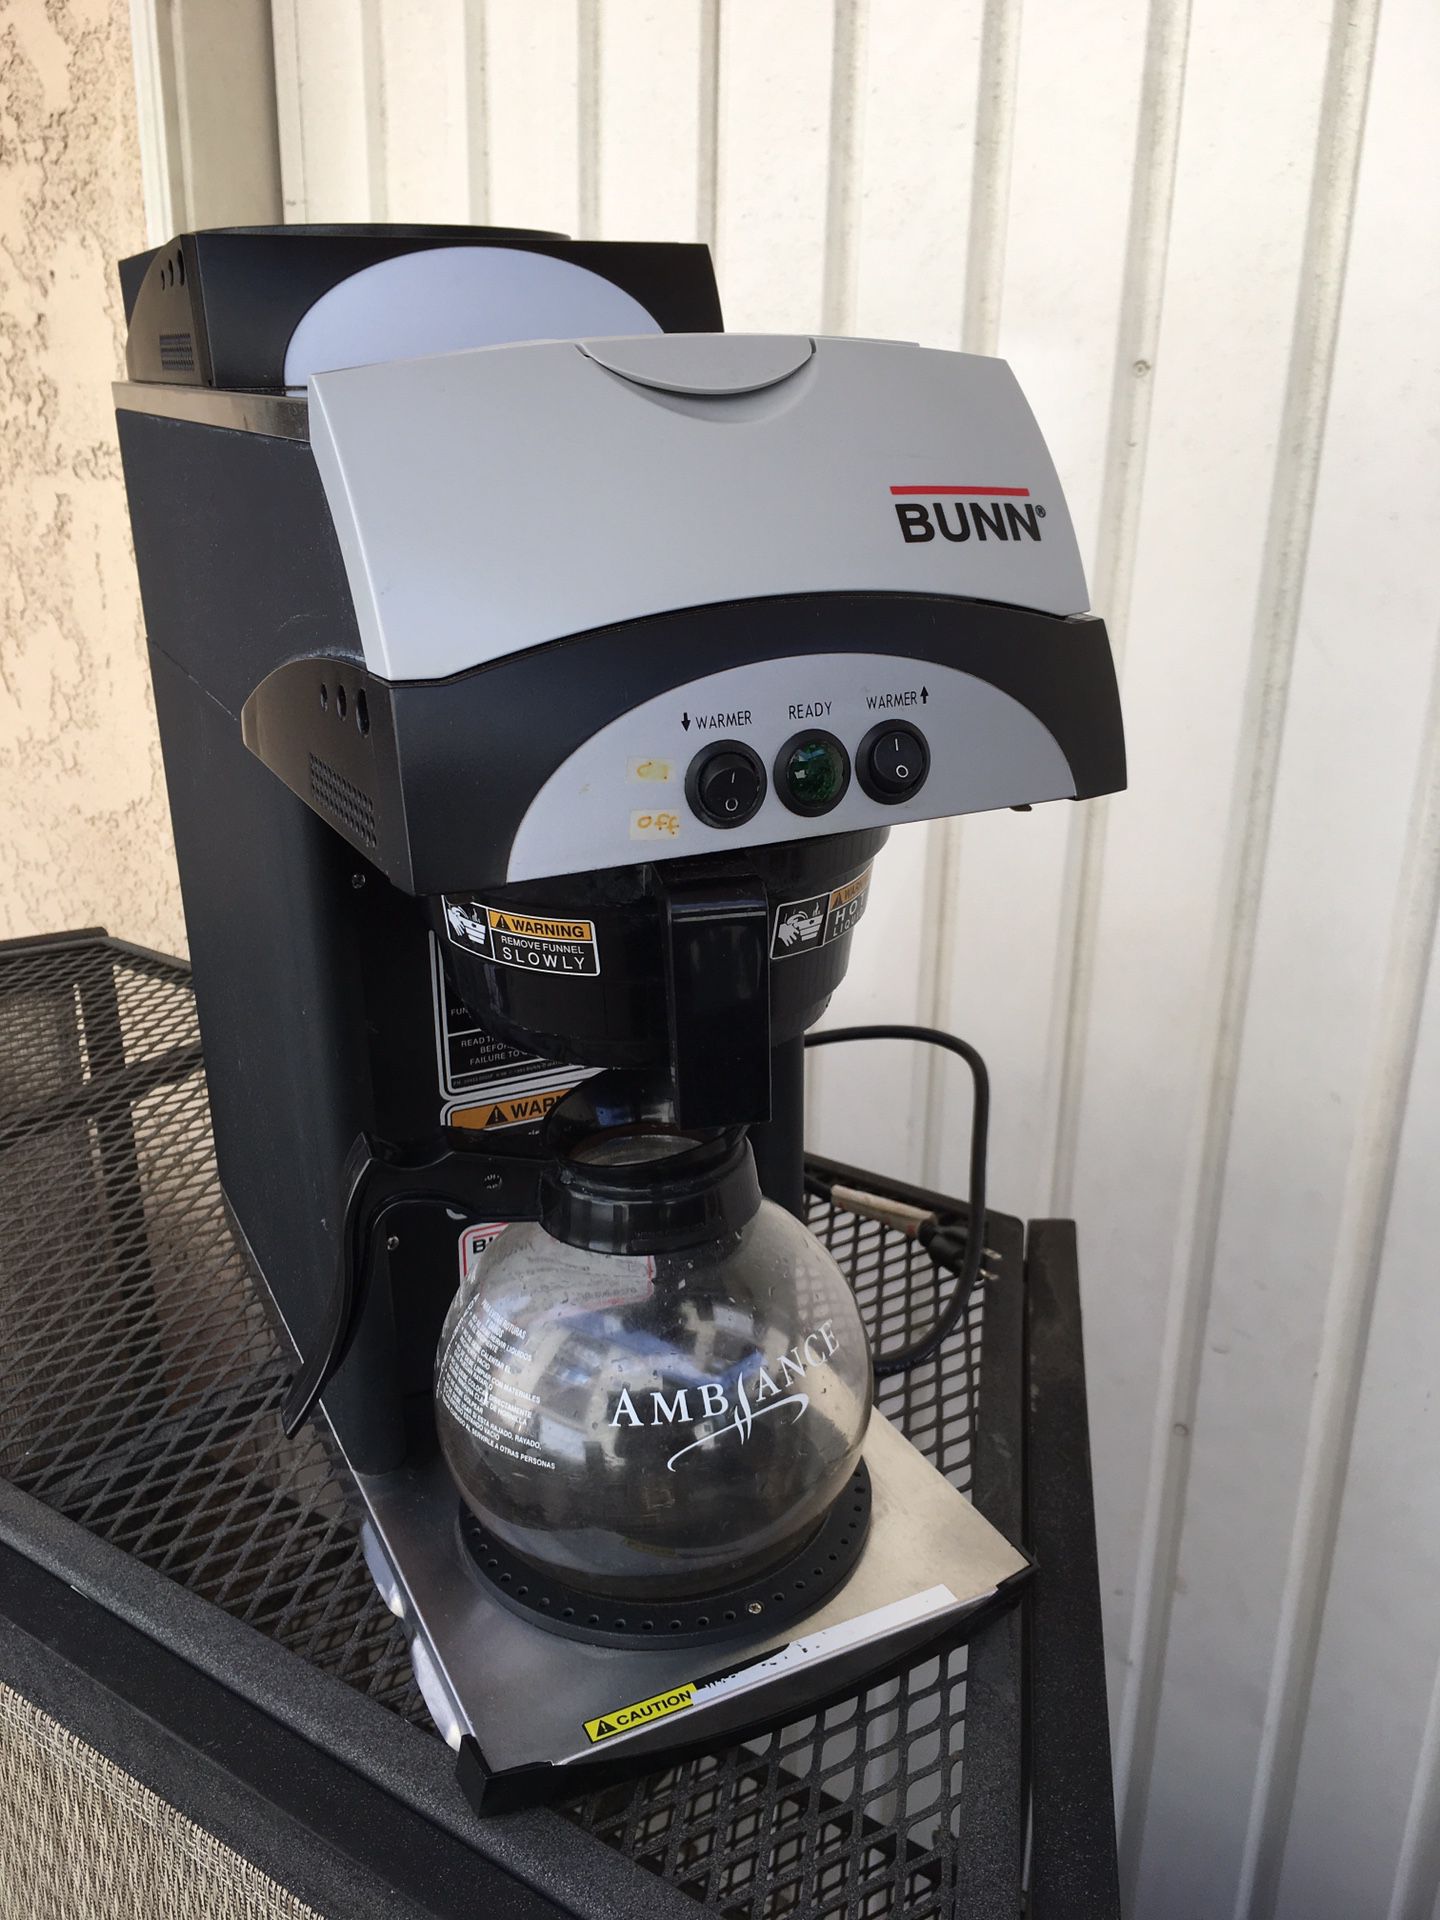 Bunn Commerical coffee maker - works great